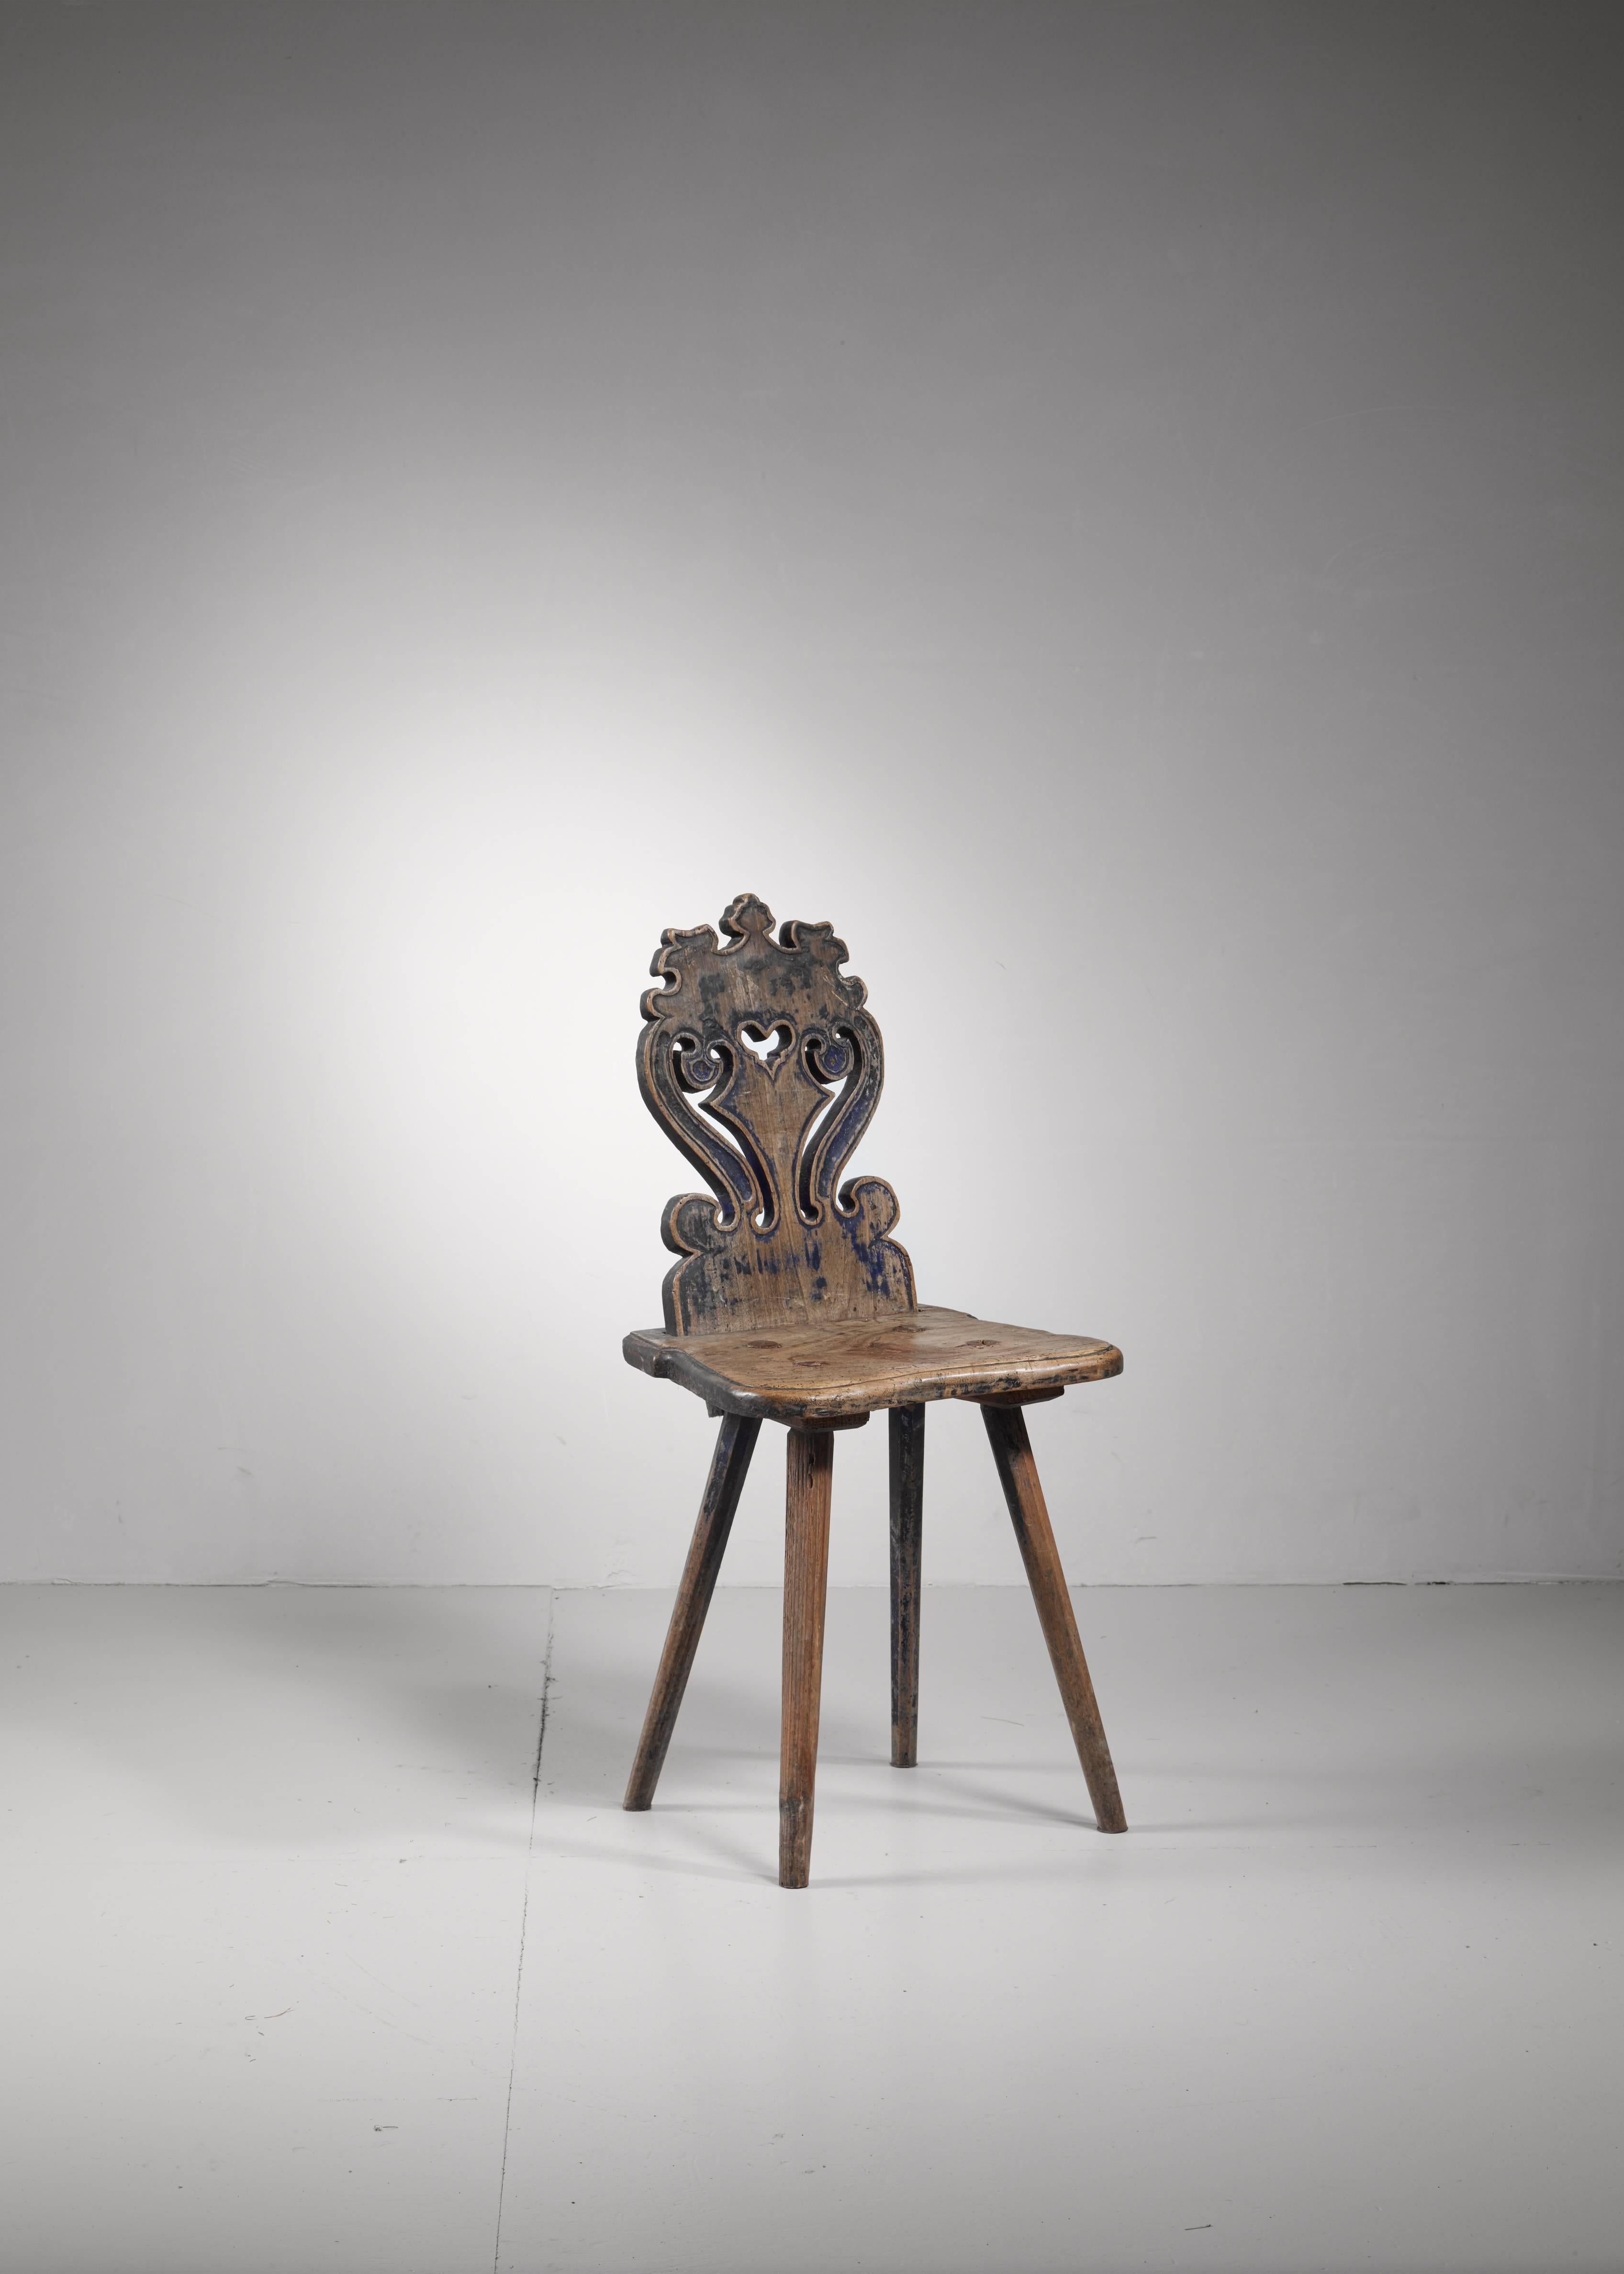 A 19th century folk art chair from Sweden (probably Blekinge in the south). The chair stands on four tapering legs and has a beautifully carved backrest.
* This piece is curated for you by Bloomberry *